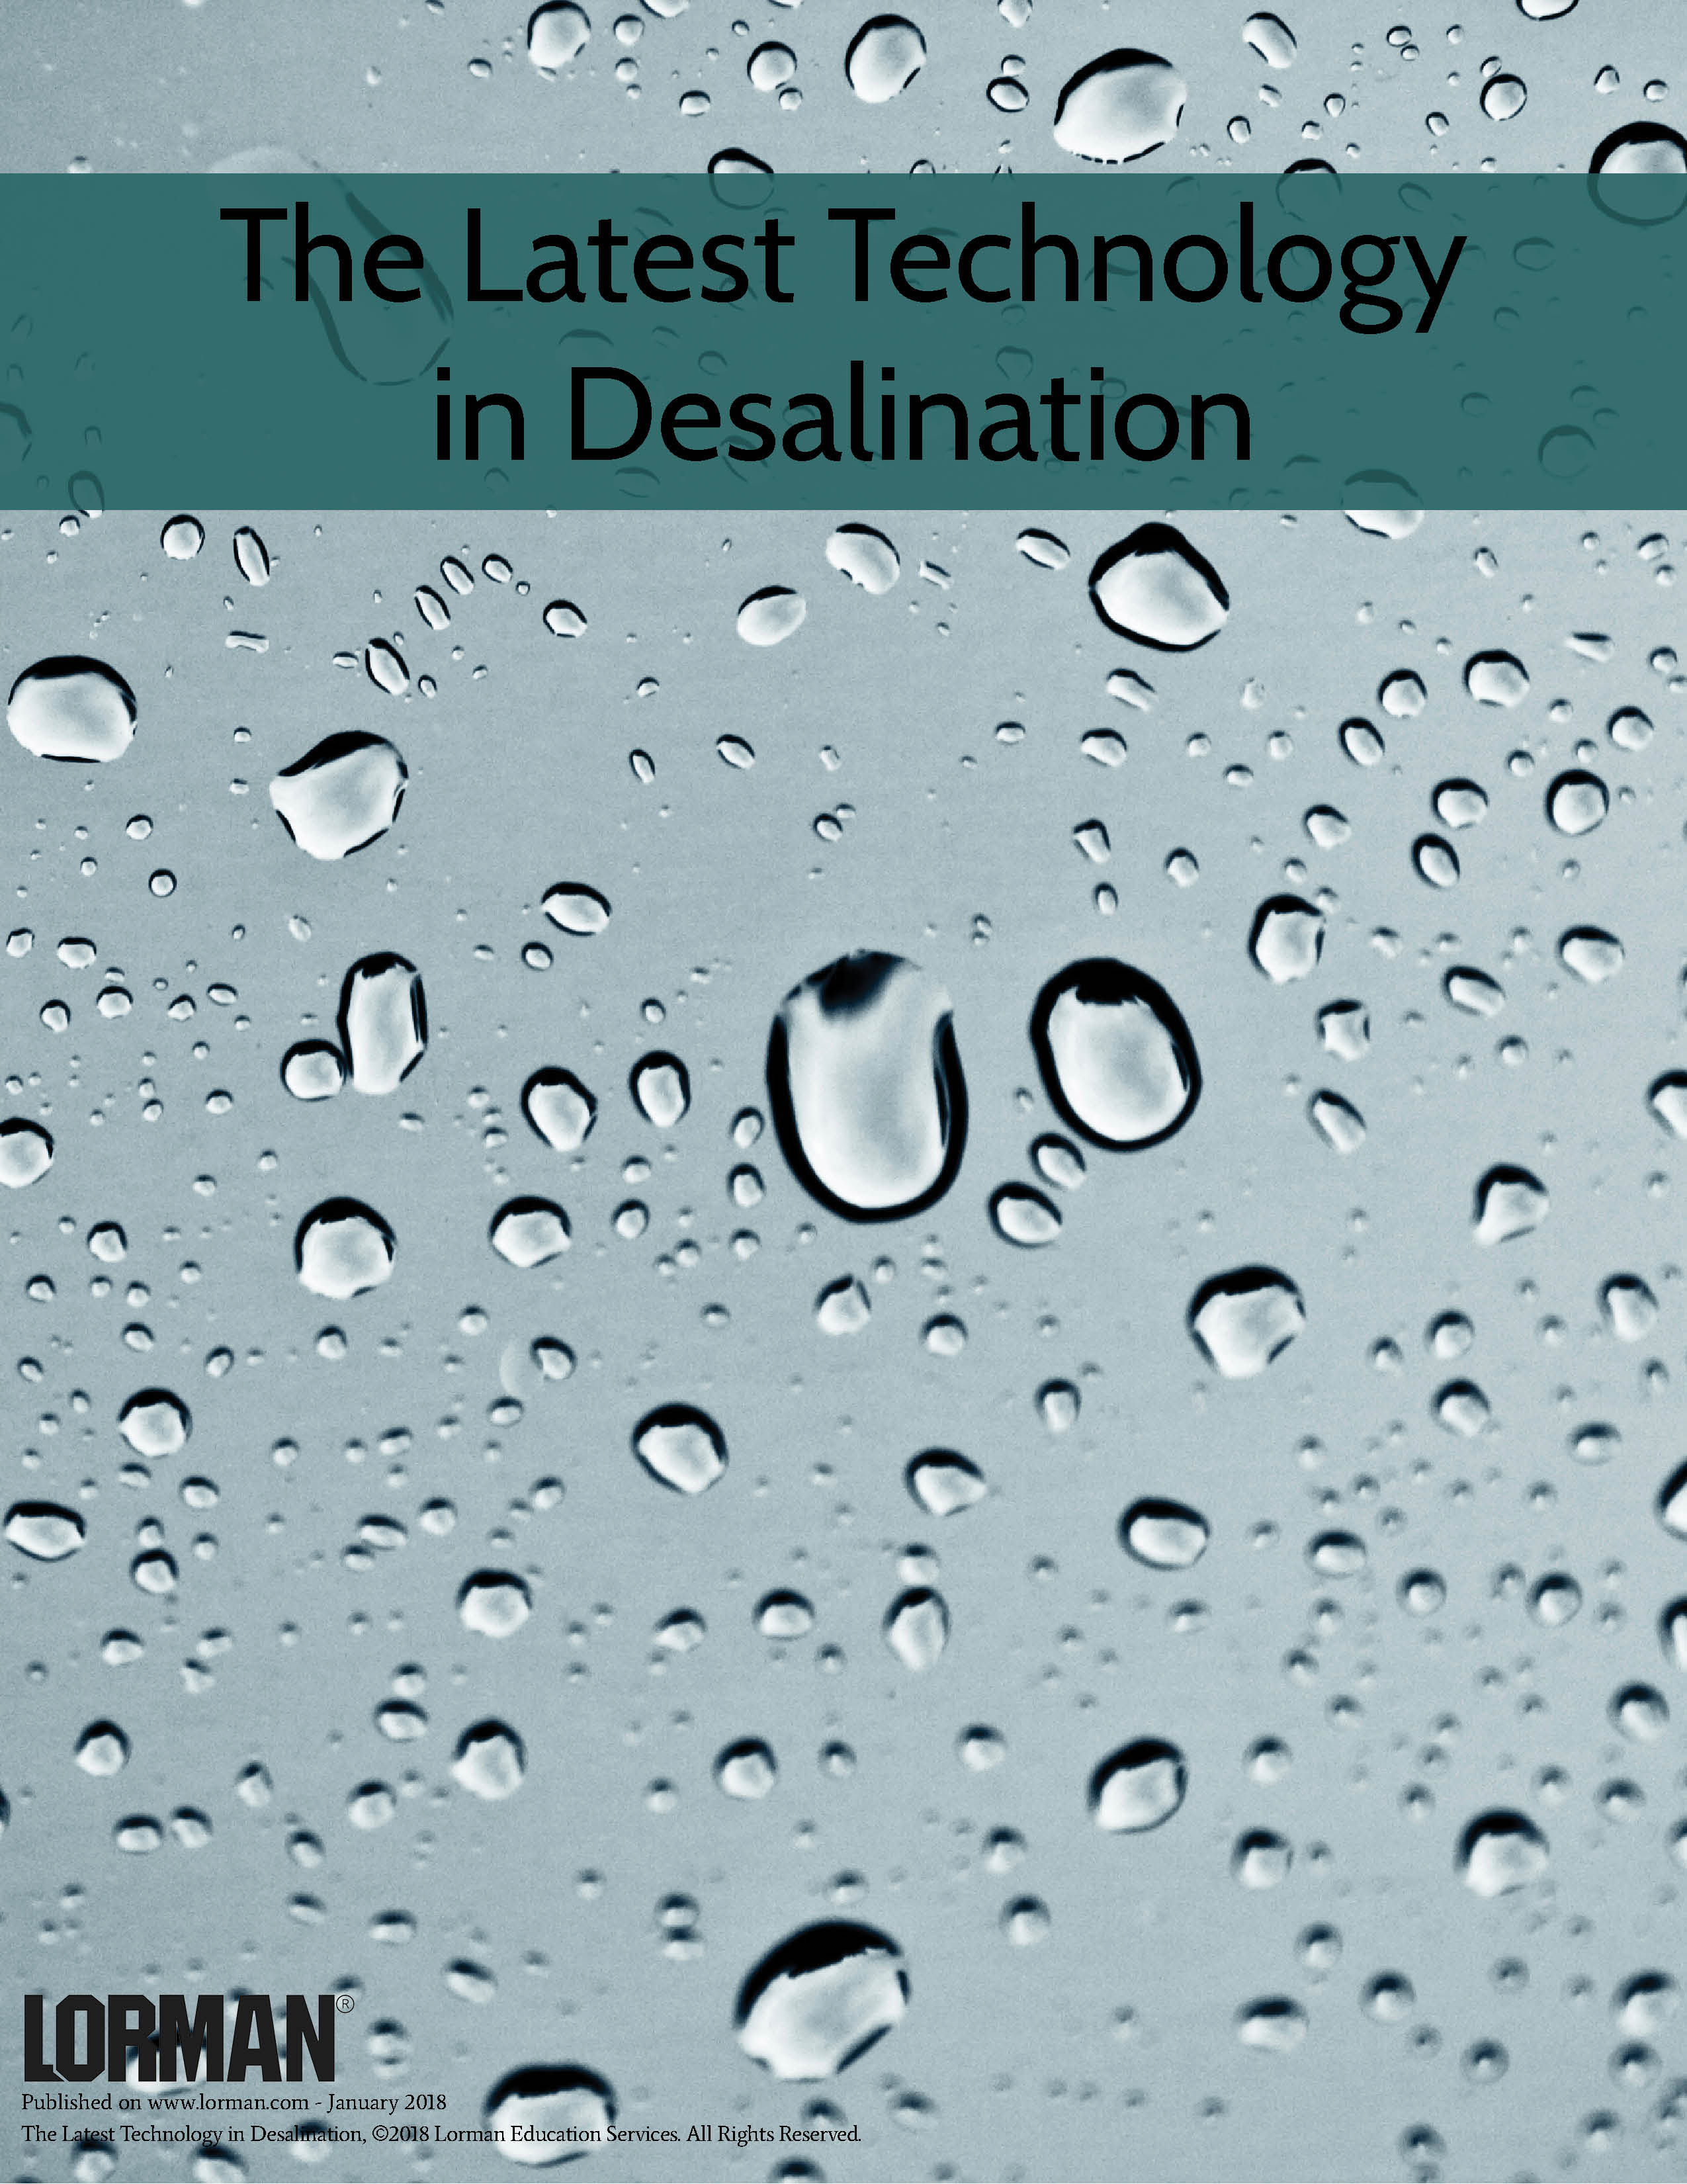 The Latest Technology in Desalination